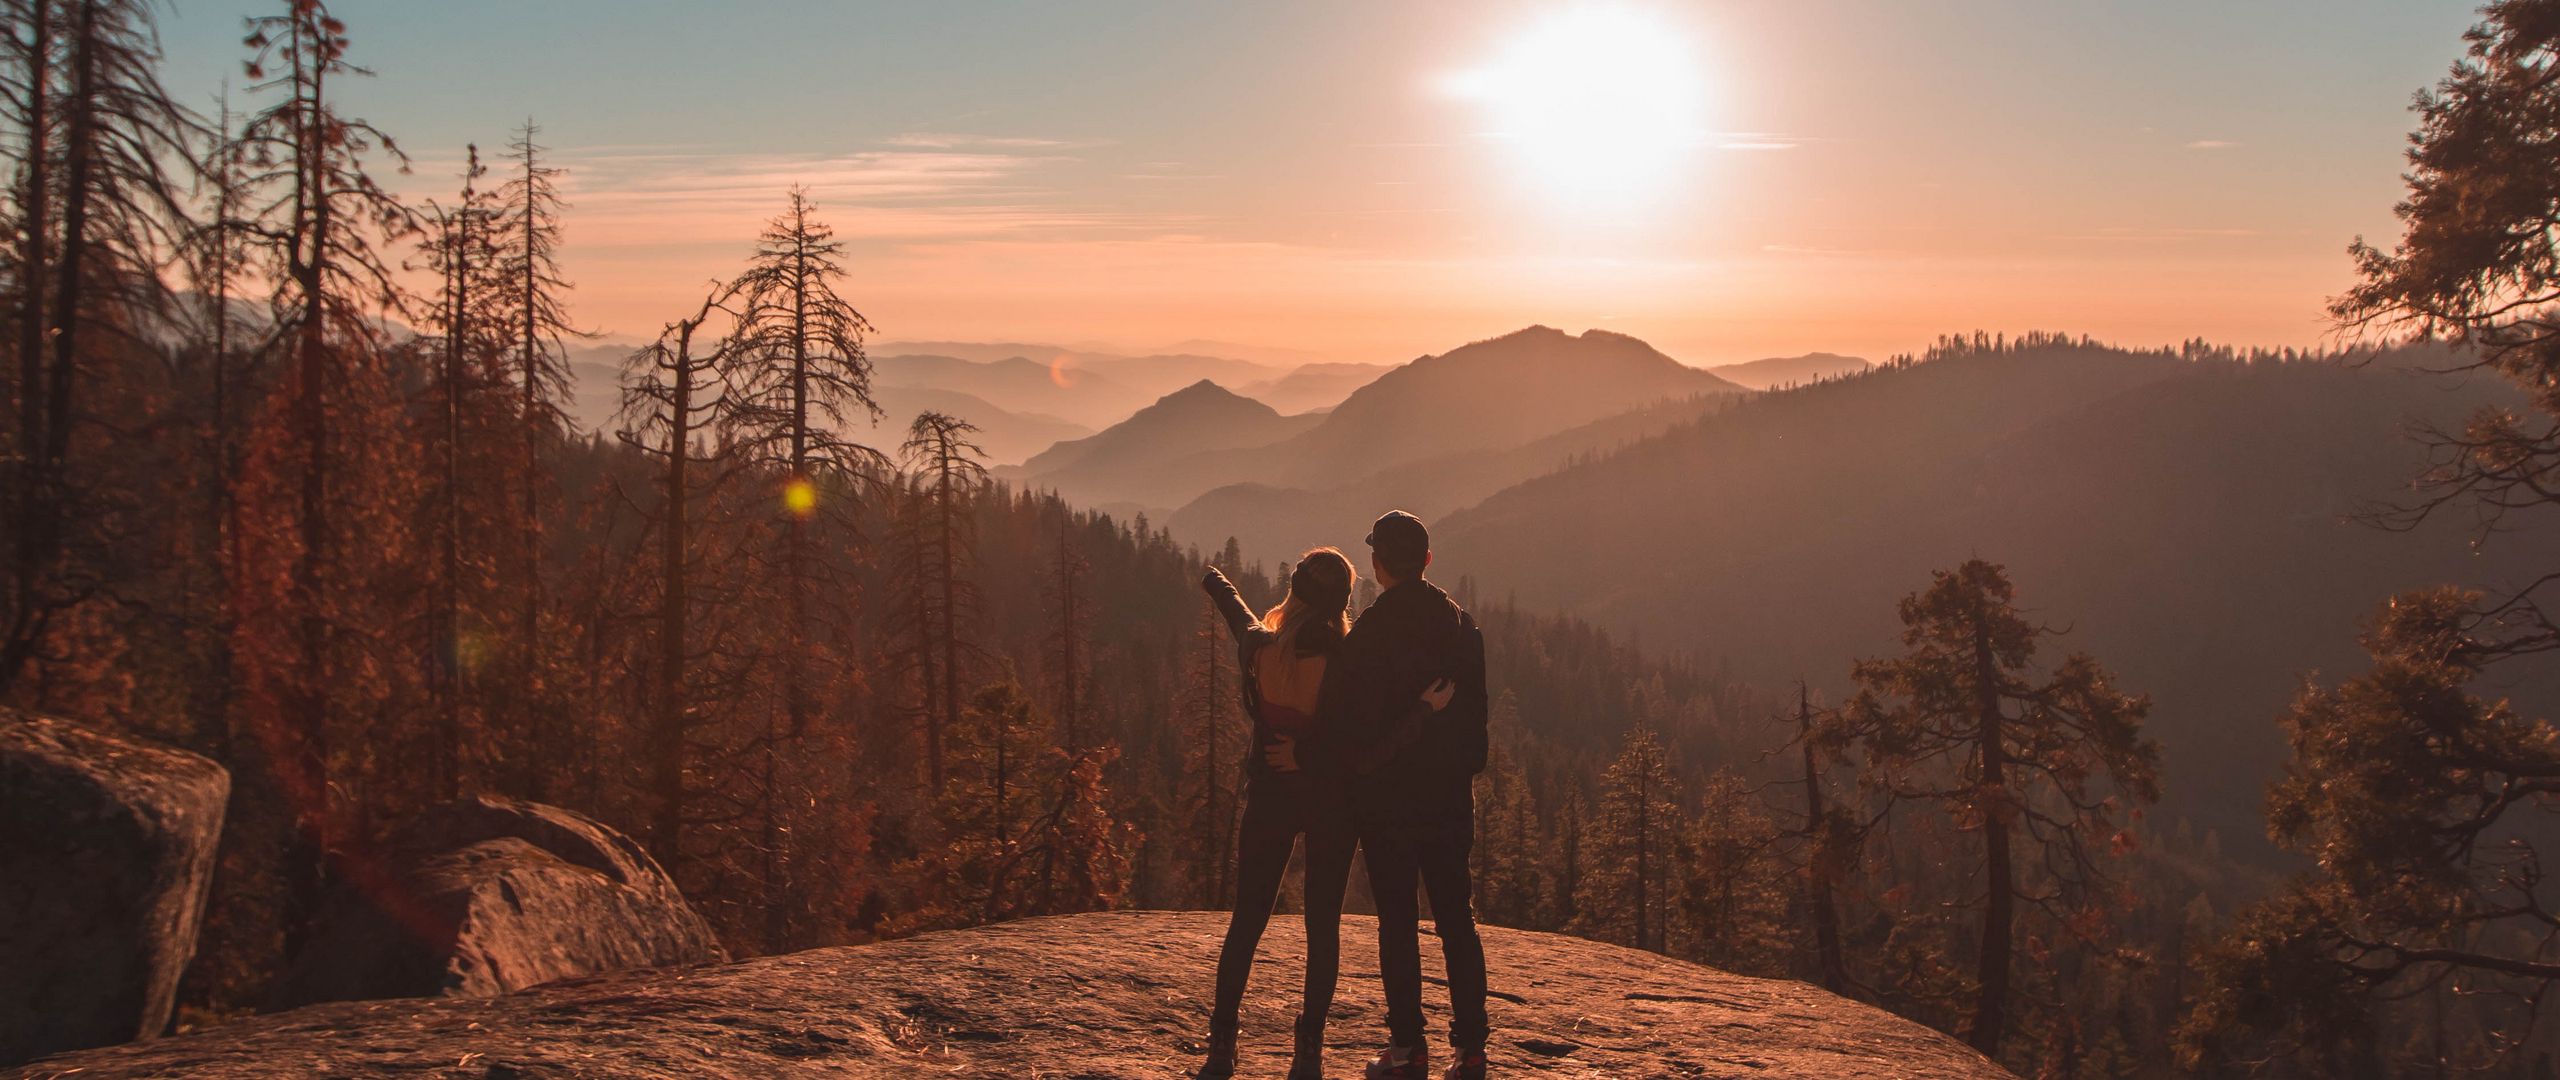 2560x1080 Wallpaper couple, mountains, travel, sunset, sequoia national park, united states